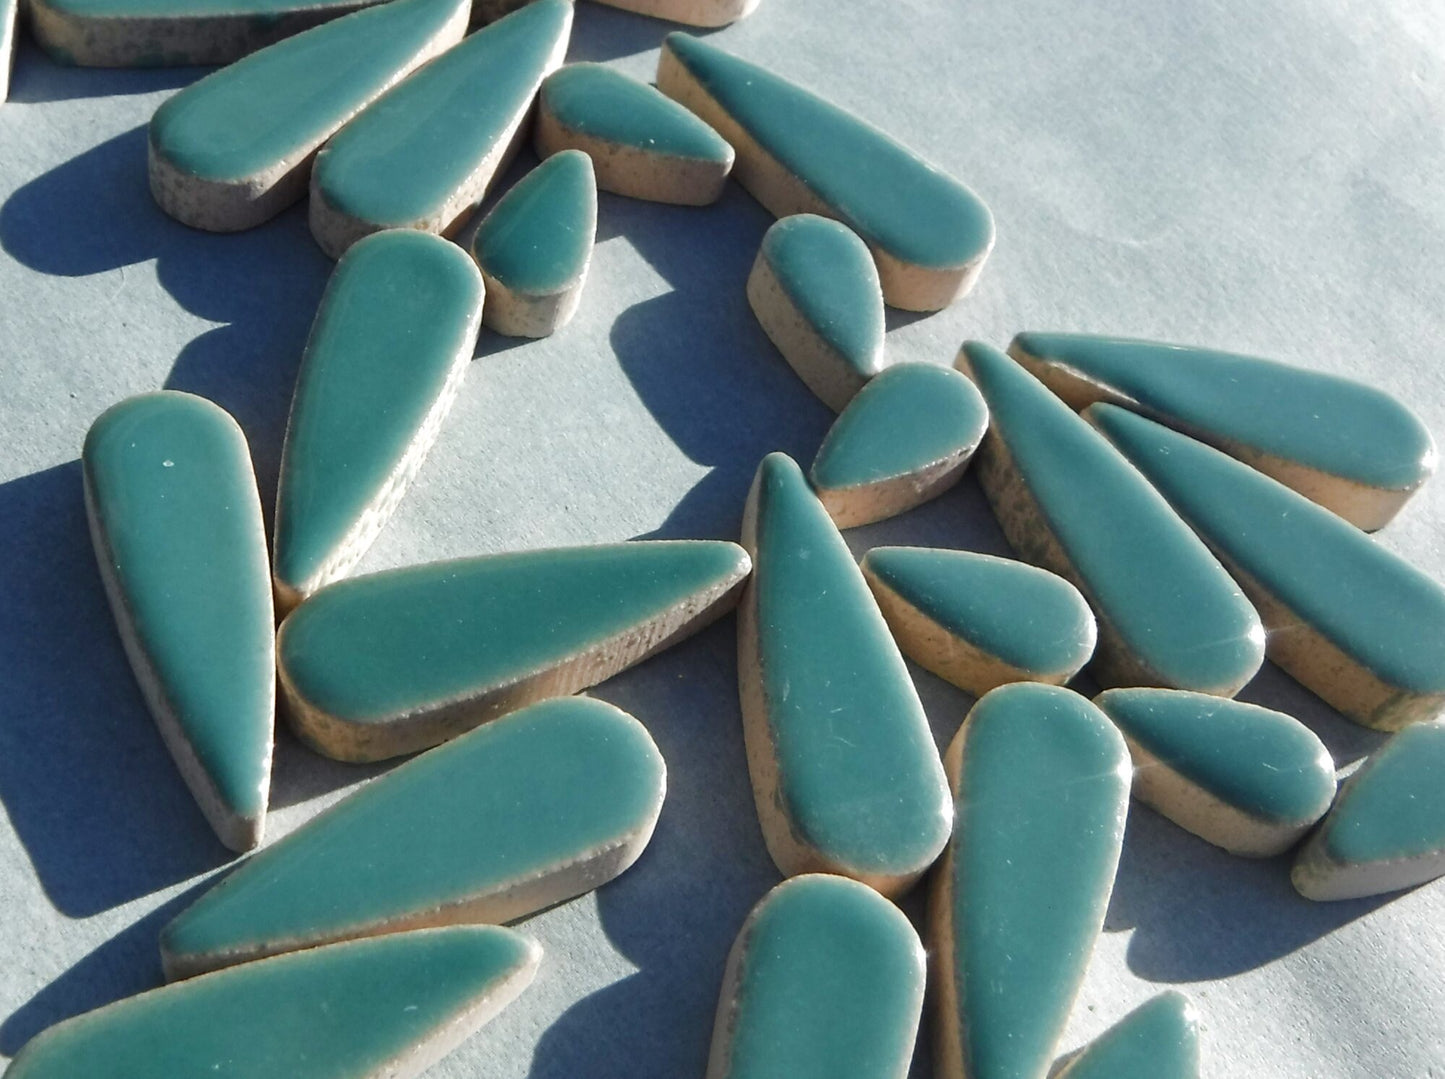 Sea Green Teardrop Mosaic Tiles - 50g Ceramic Petals in Mix of 2 Sizes 1/2" and 3/5"